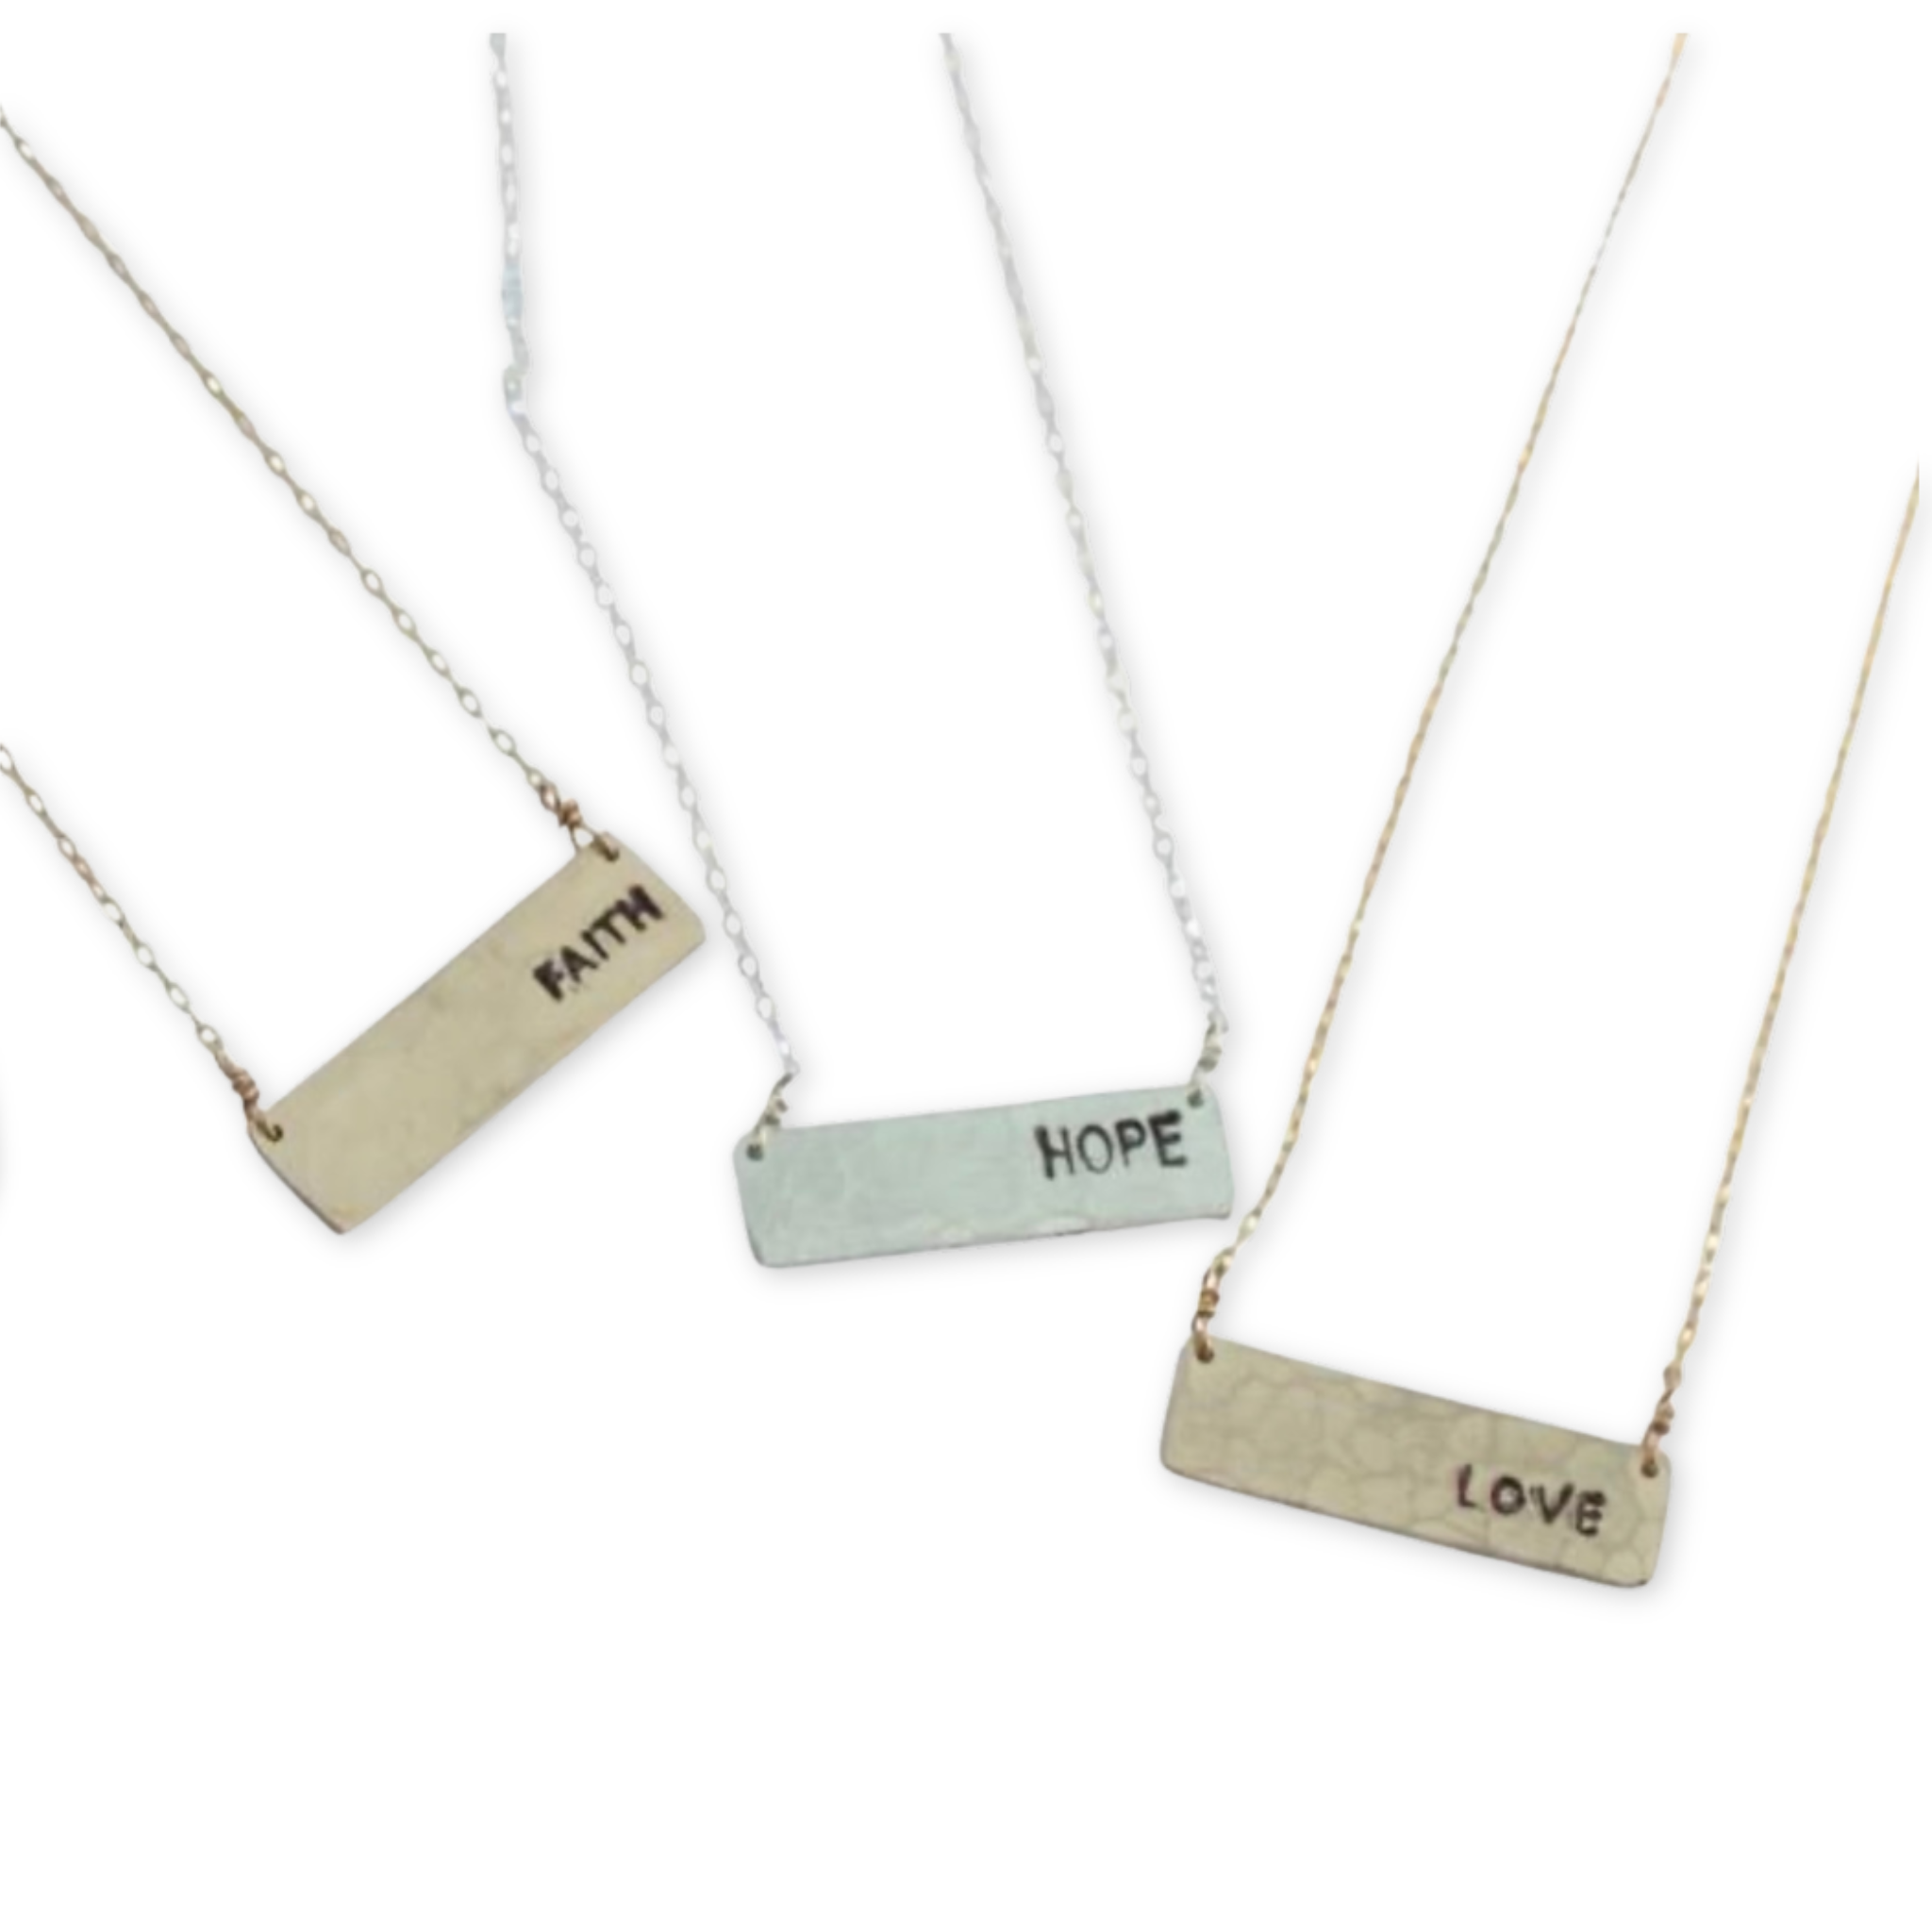 delicate necklace chain with hammered rectangular pendant stamped with words